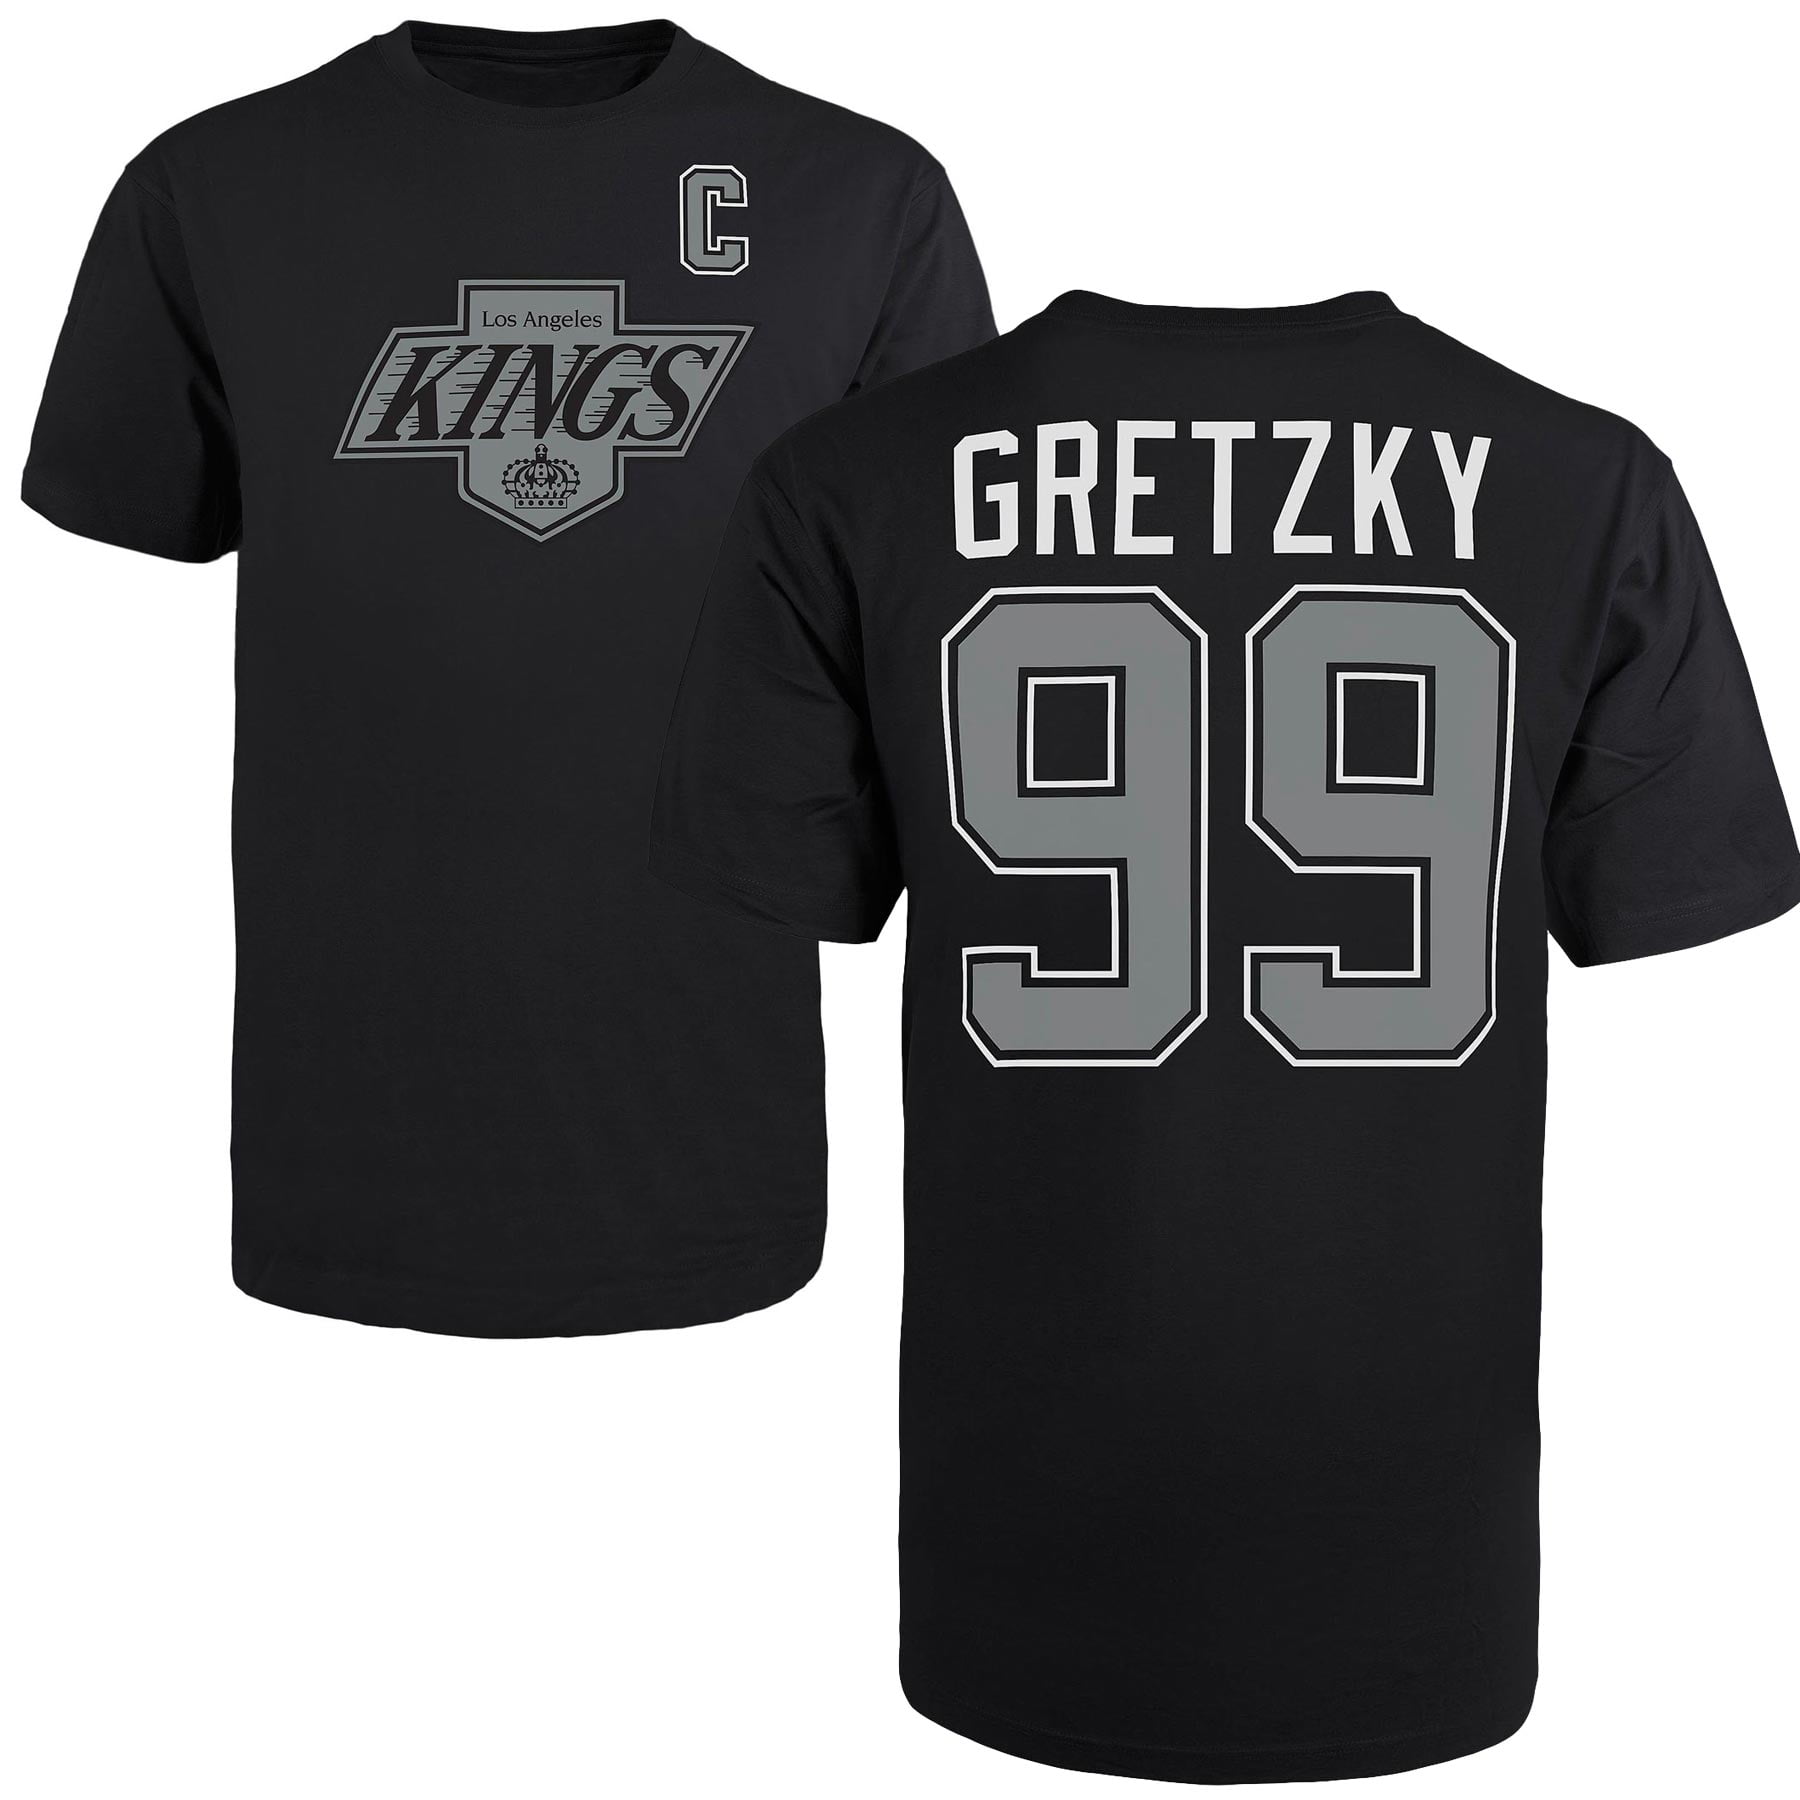 NWT Wayne Gretzky Los Angeles Kings Majestic Name and Number Shirt Size Mens L